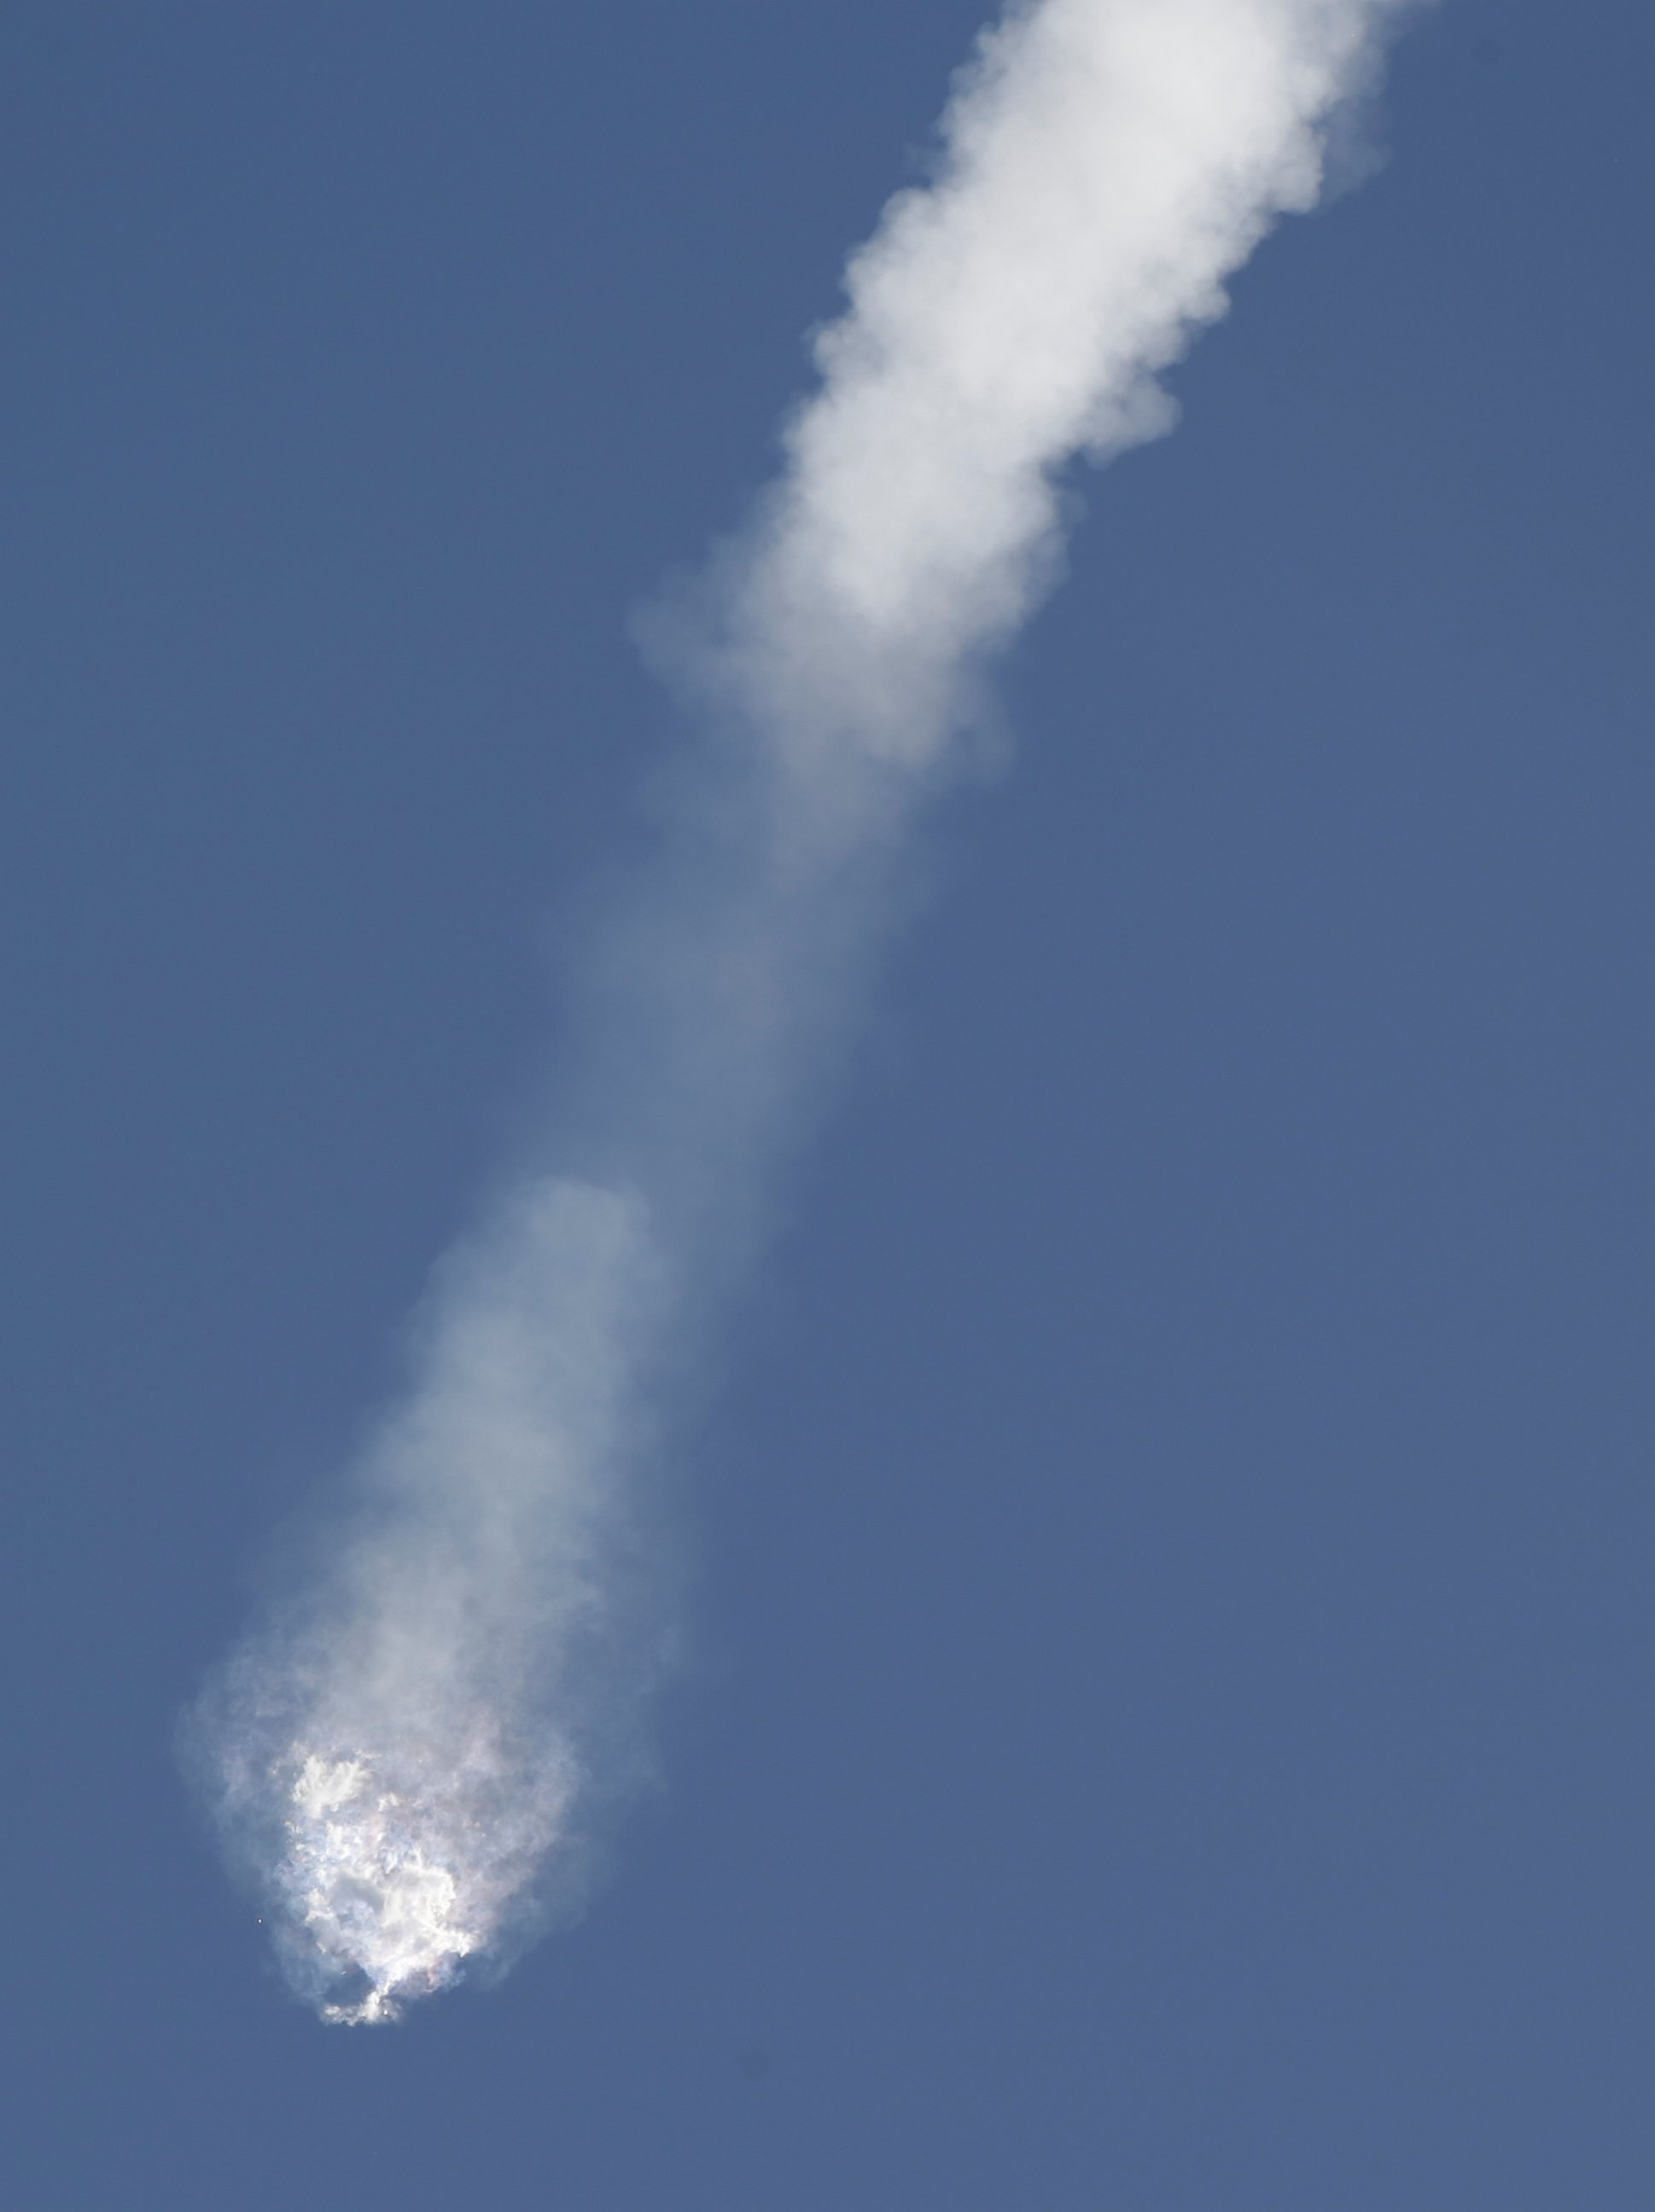 PHOTO: The SpaceX Falcon 9 rocket and Dragon spacecraft breaks apart shortly after liftoff at the Cape Canaveral Air Force Station in Cape Canaveral, Fla., Sunday, June 28, 2015. 